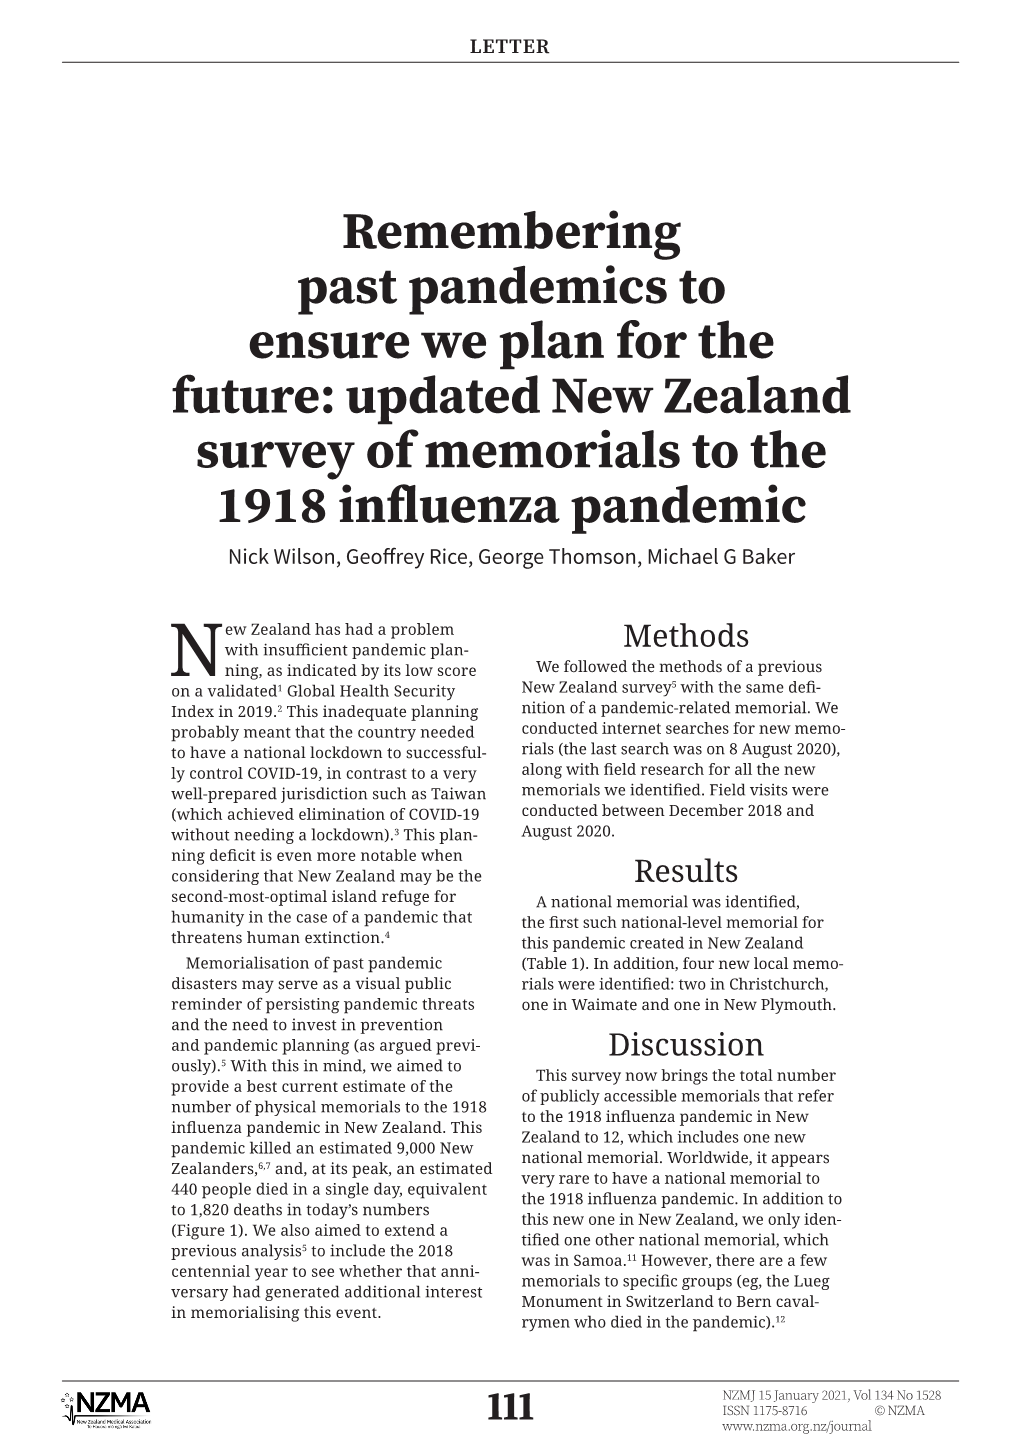 Updated New Zealand Survey of Memorials to the 1918 Influenza Pandemic Nick Wilson, Geoffrey Rice, George Thomson, Michael G Baker